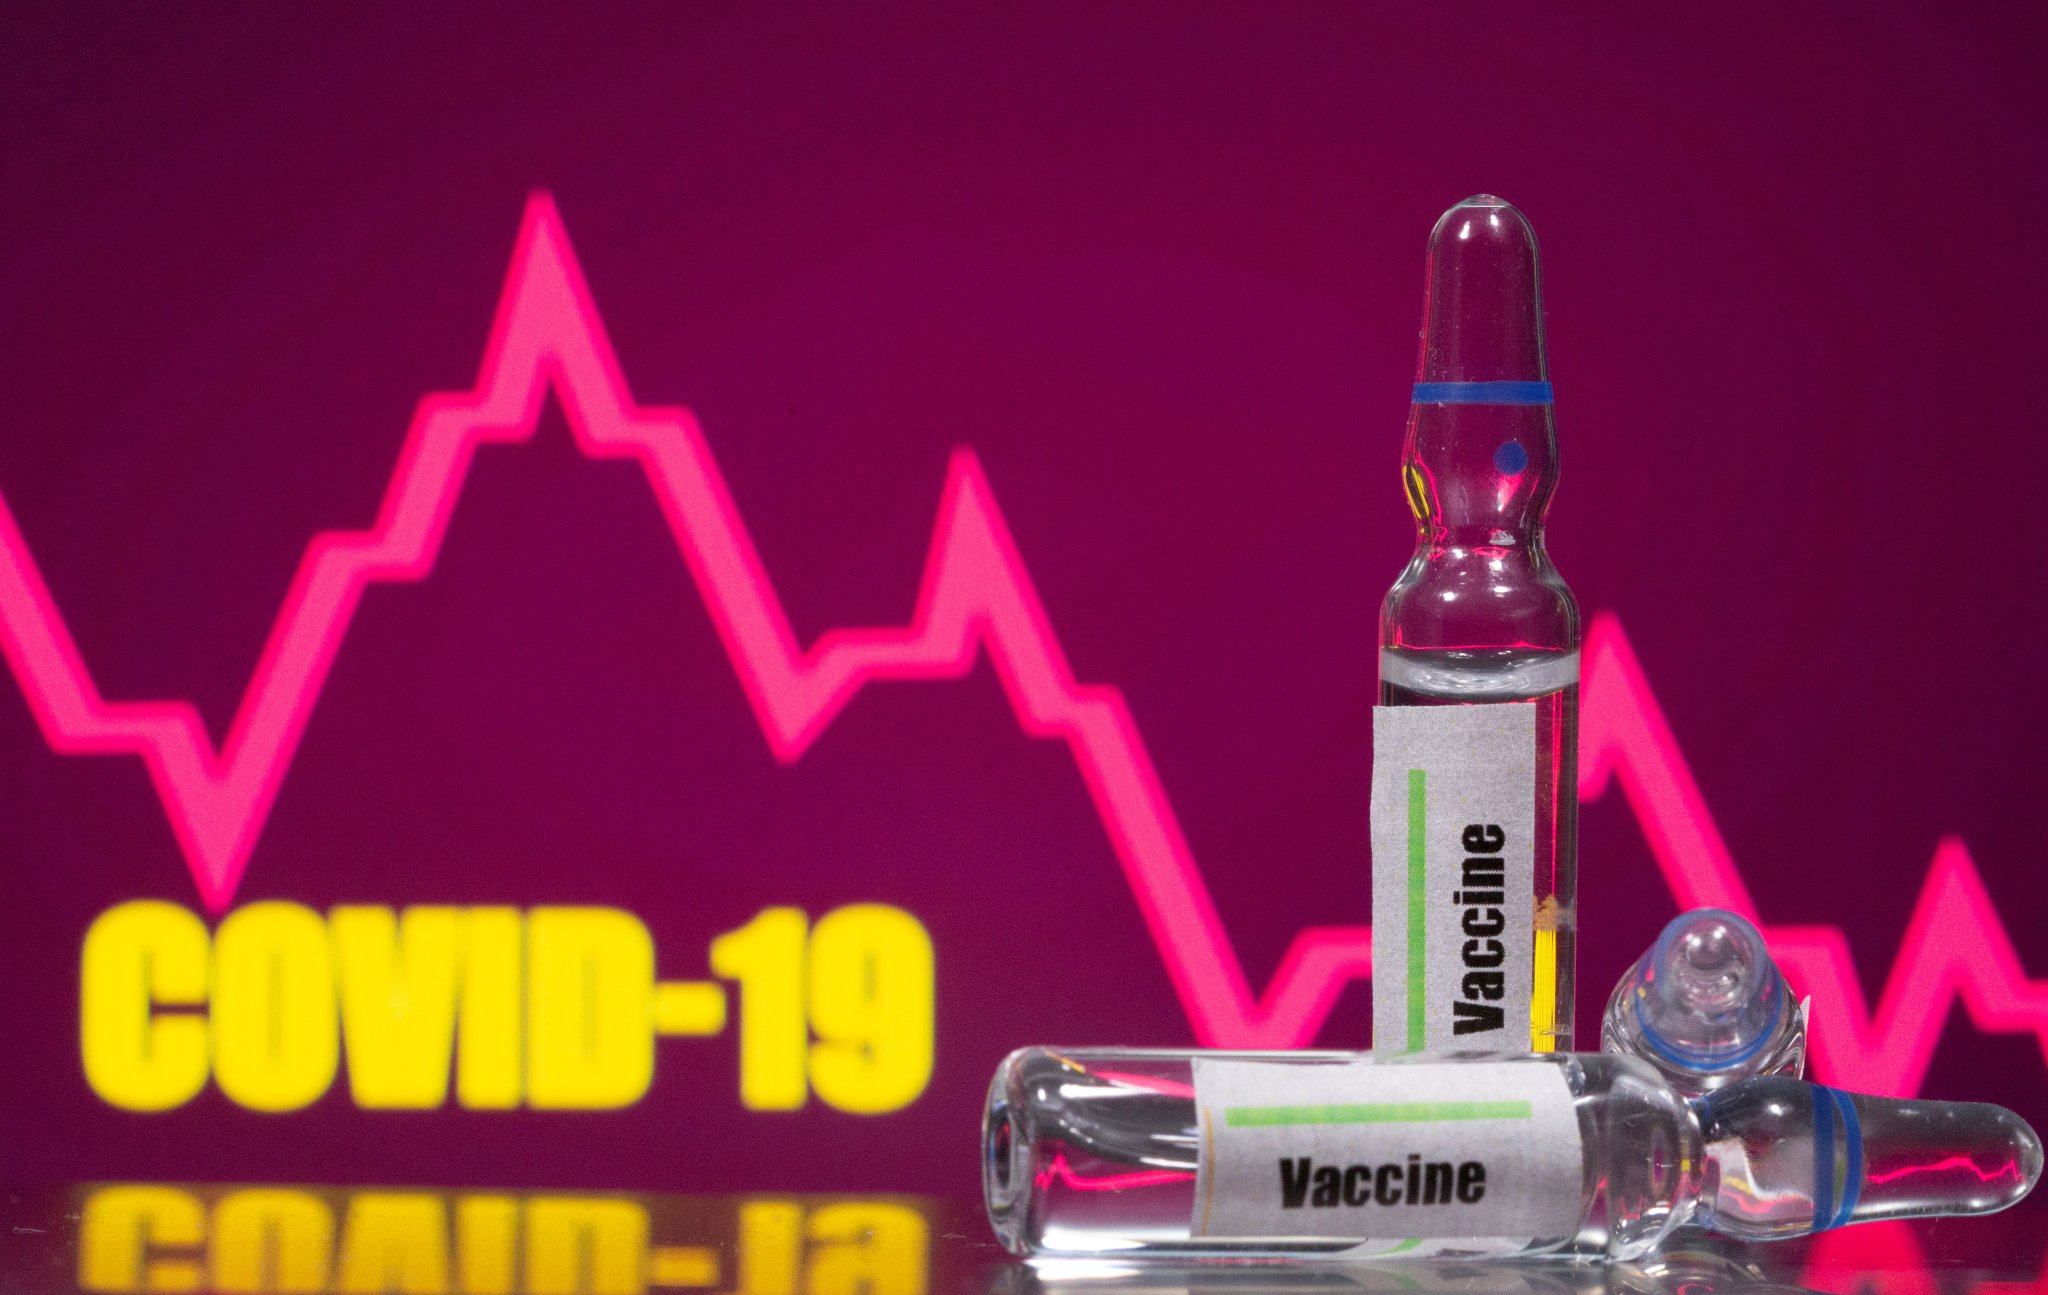 Most people would get COVID-19 vaccine if offered by government or employer: poll